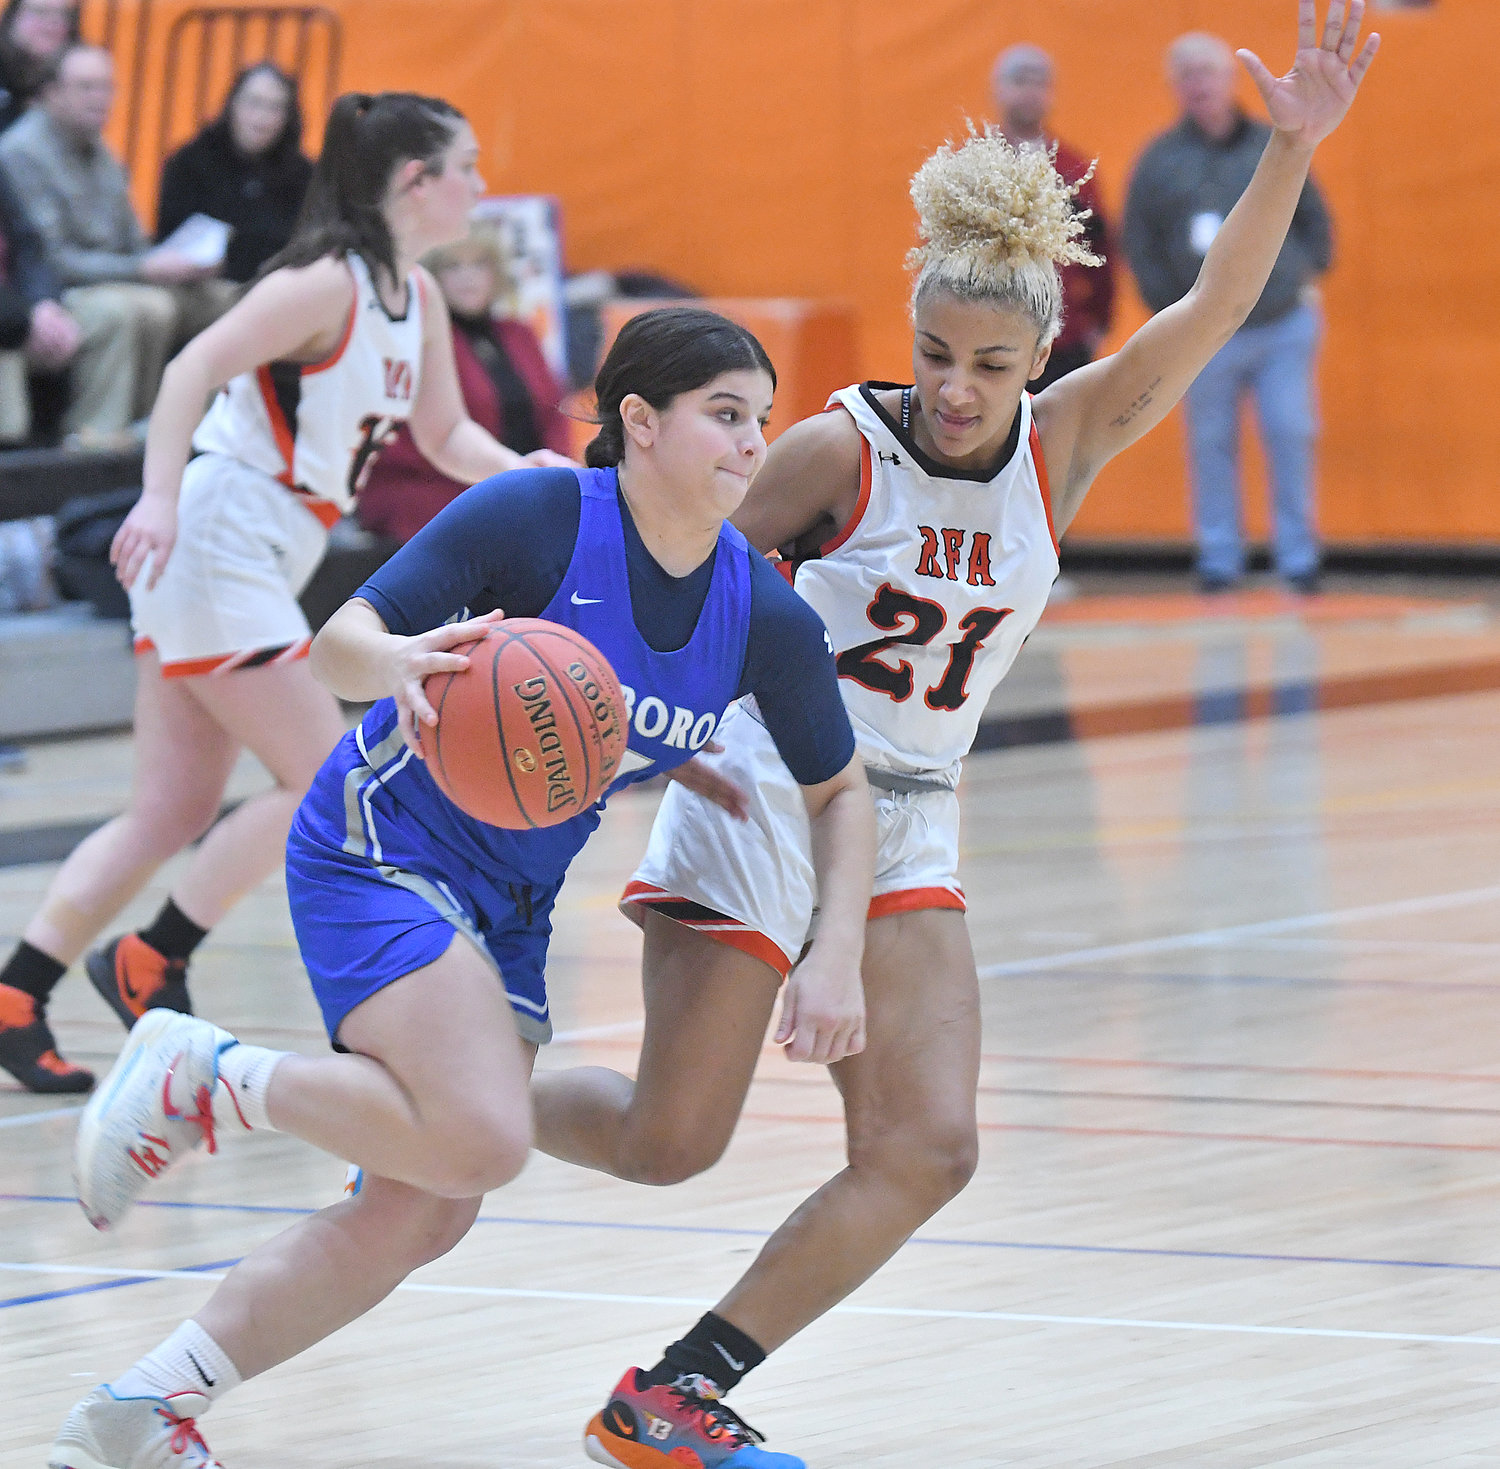 RFA's Amya McLeod guards Whitesboro's Hayley Bostwick in the first quarter at RFA Friday night. McLeod finished with 27 points in the team's 12th consecutive win.